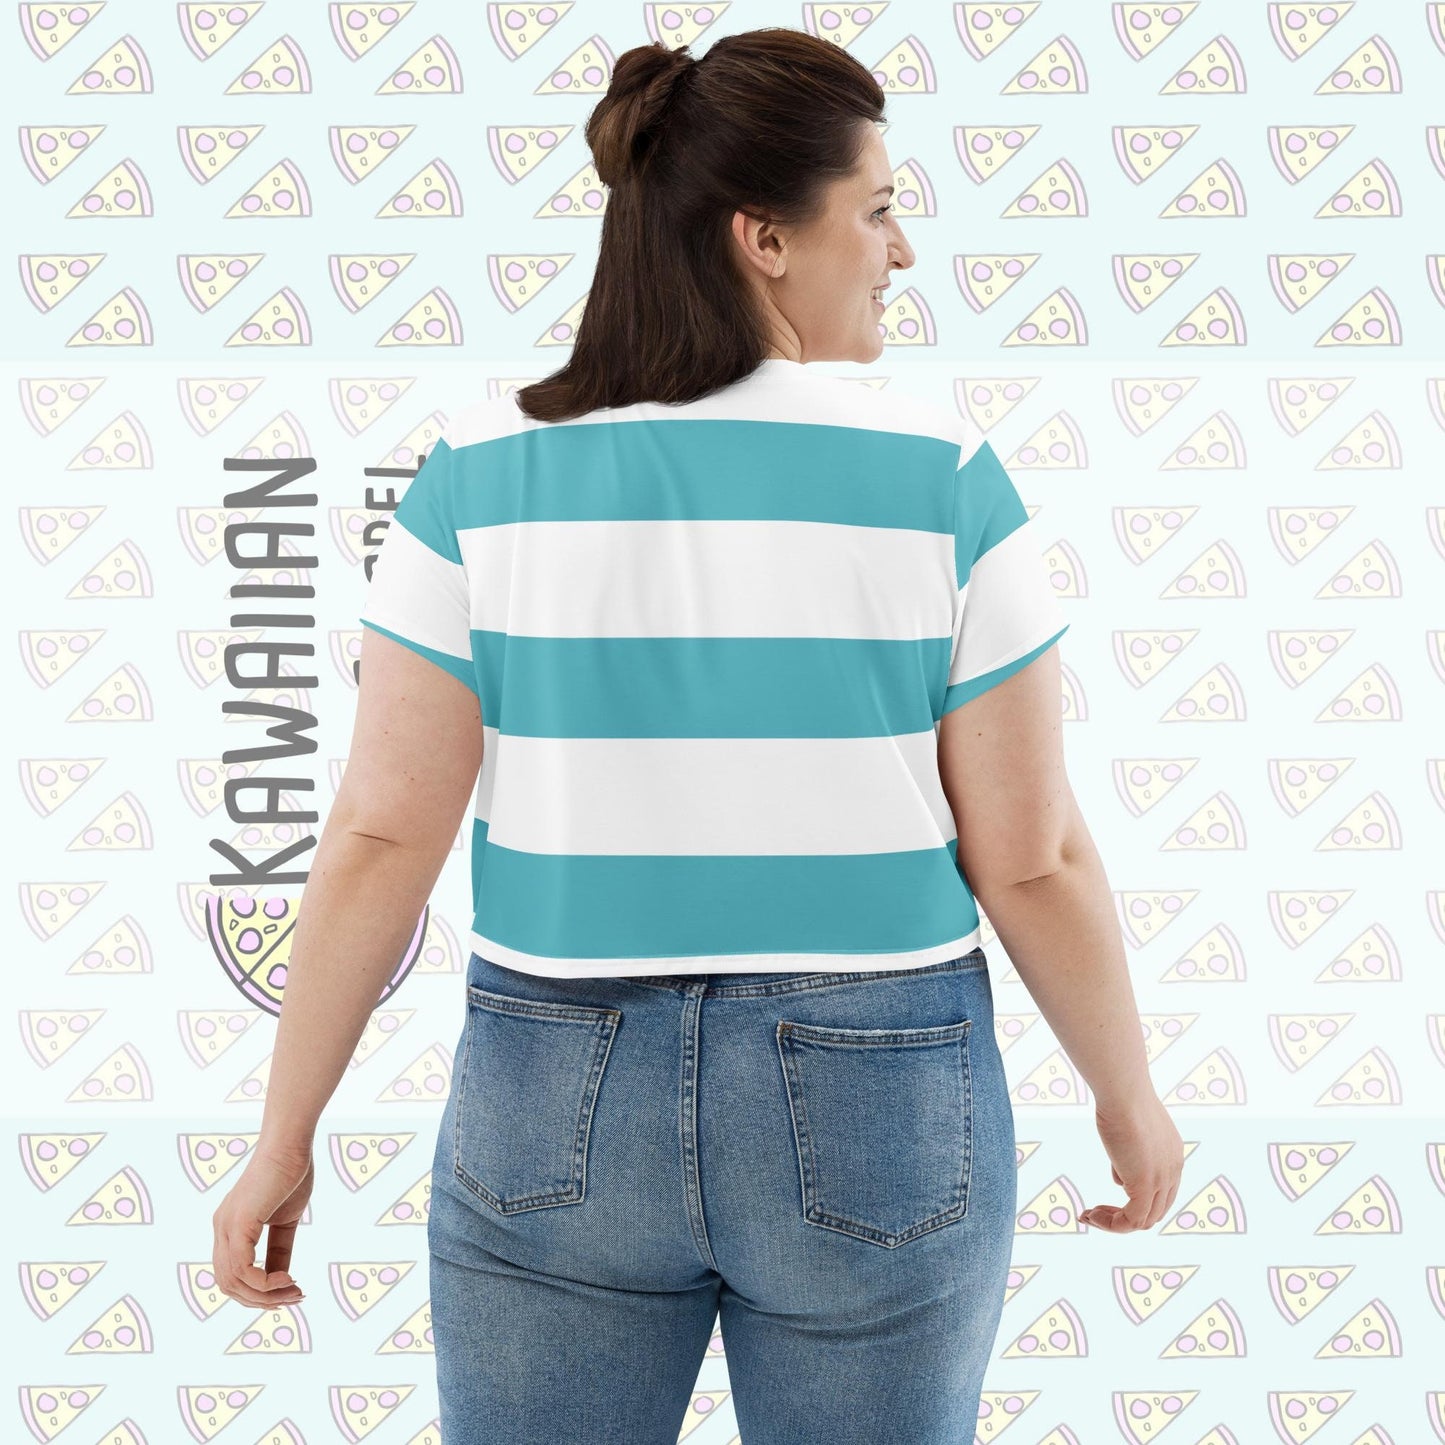 RUSH ORDER: Mr. Smee Inspired All-Over Print Crop Tee